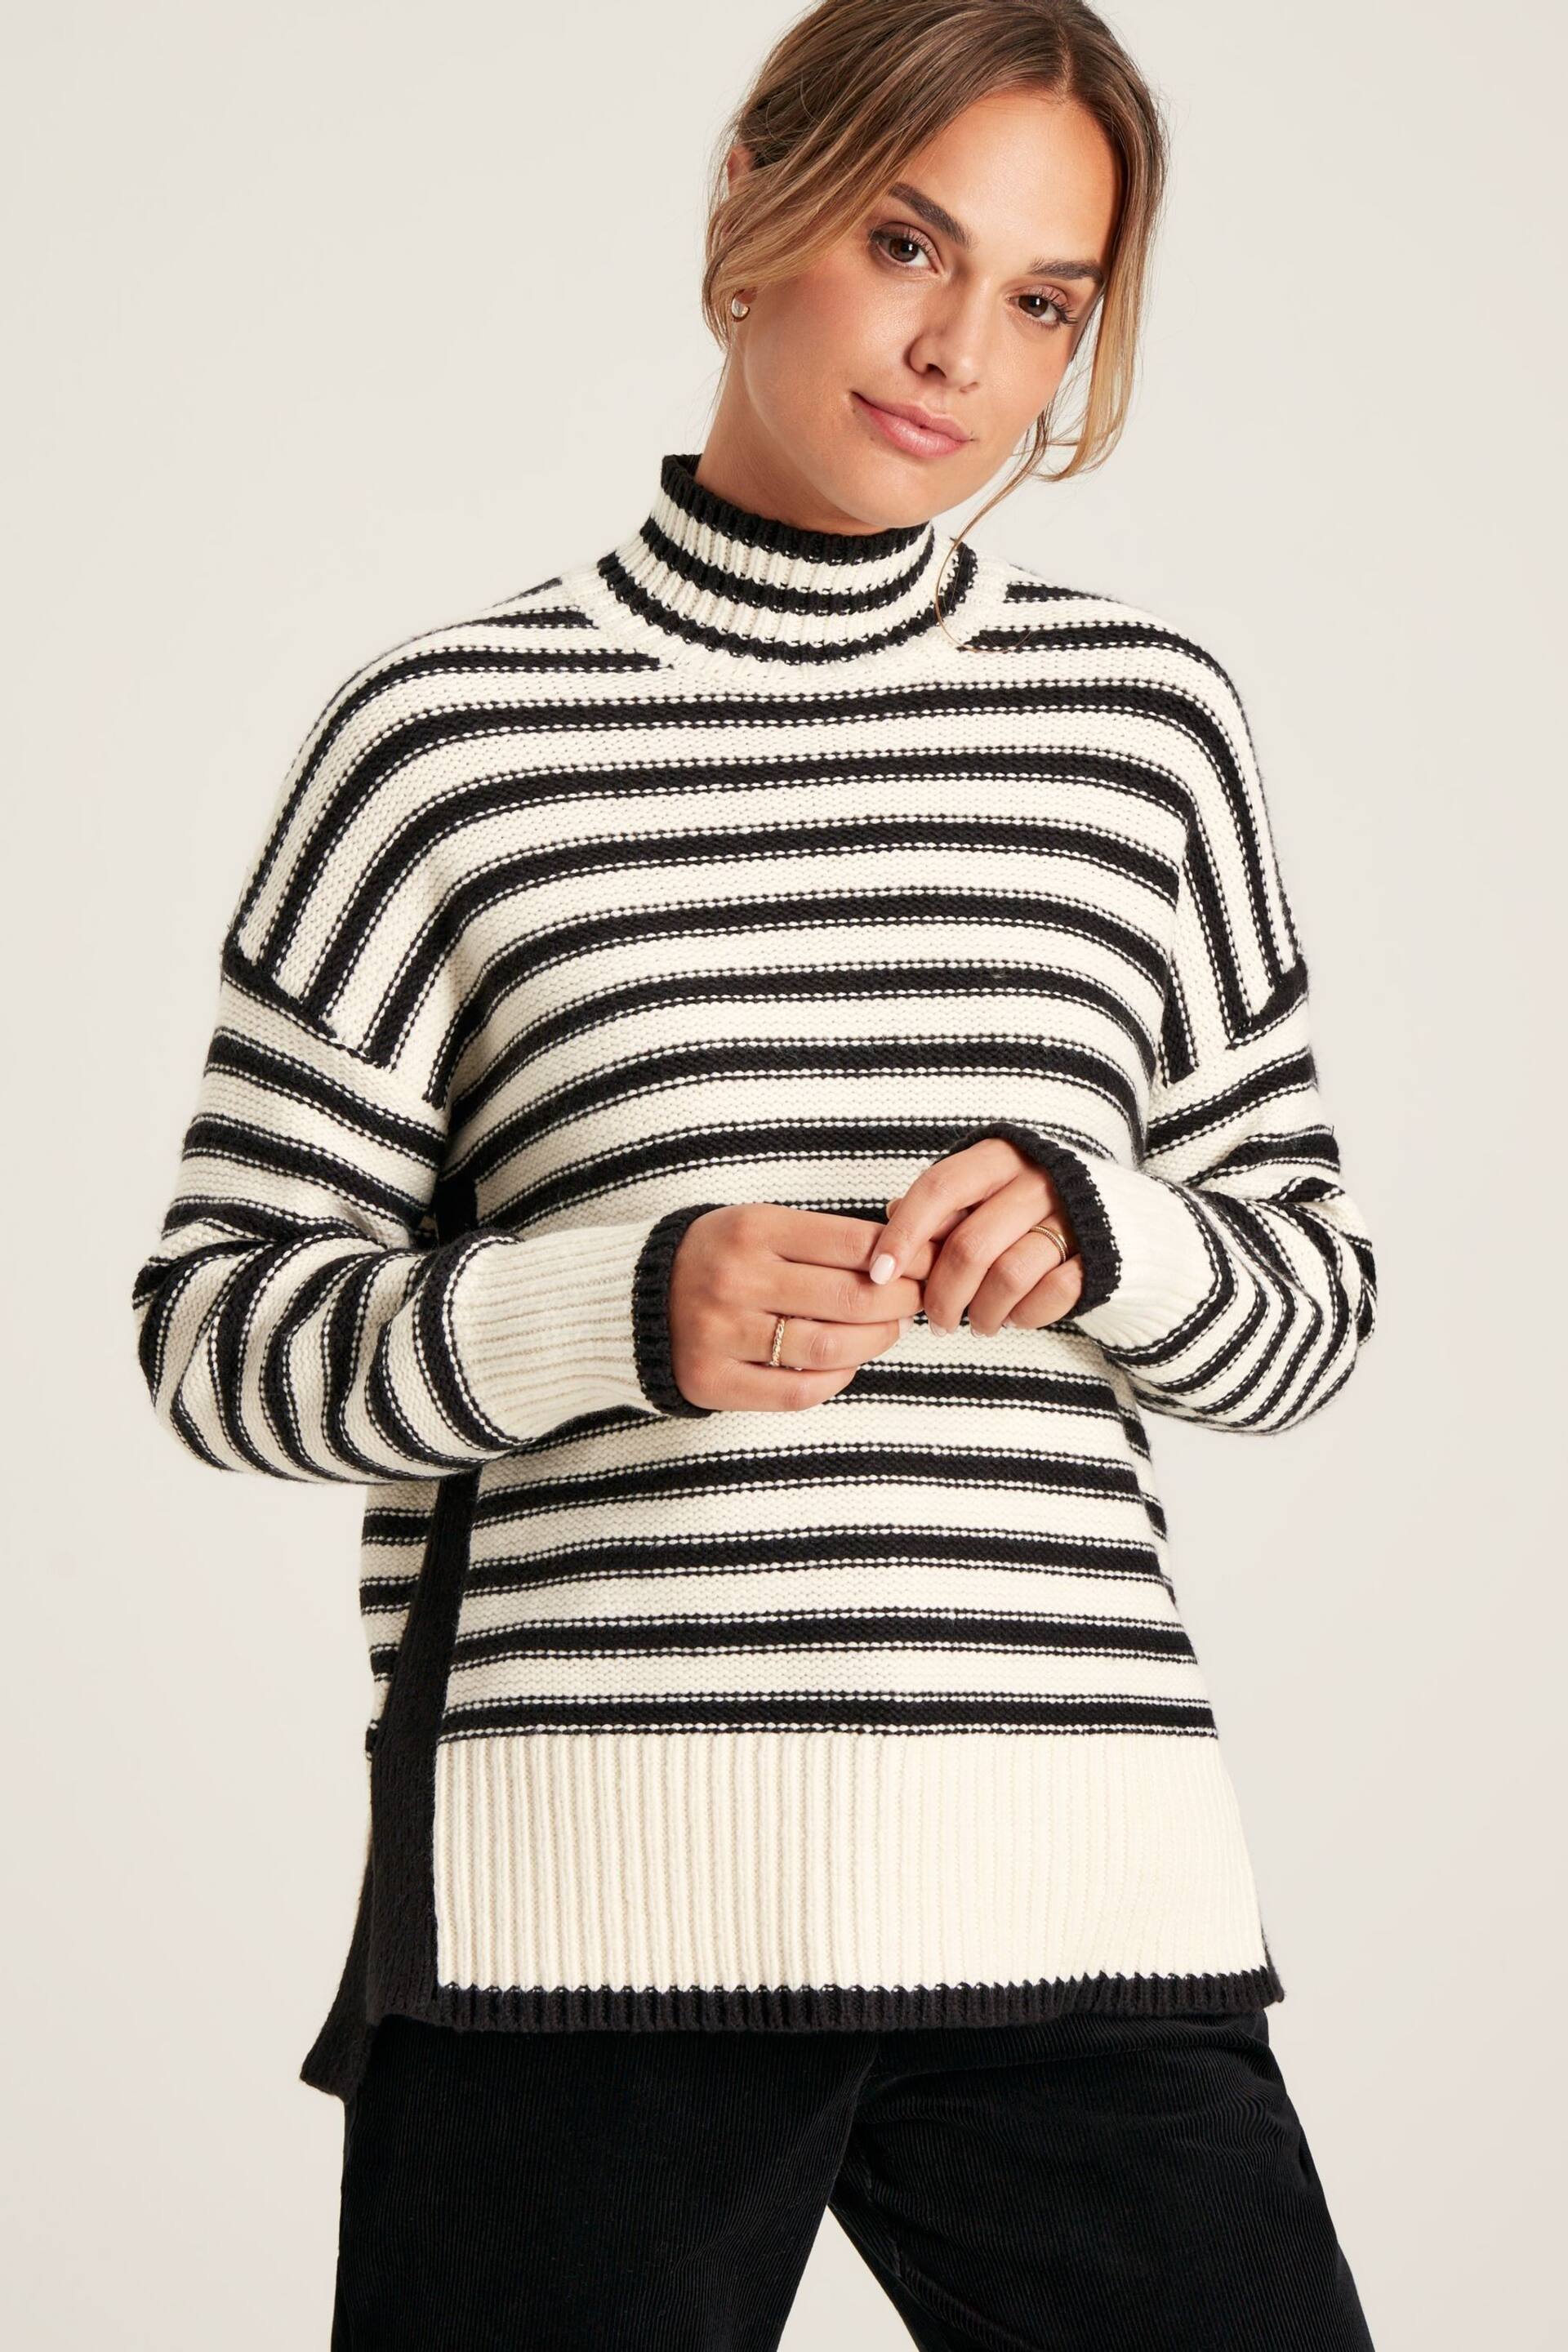 Joules Tandie Black/Cream Striped High Neck Jumper - Image 1 of 7